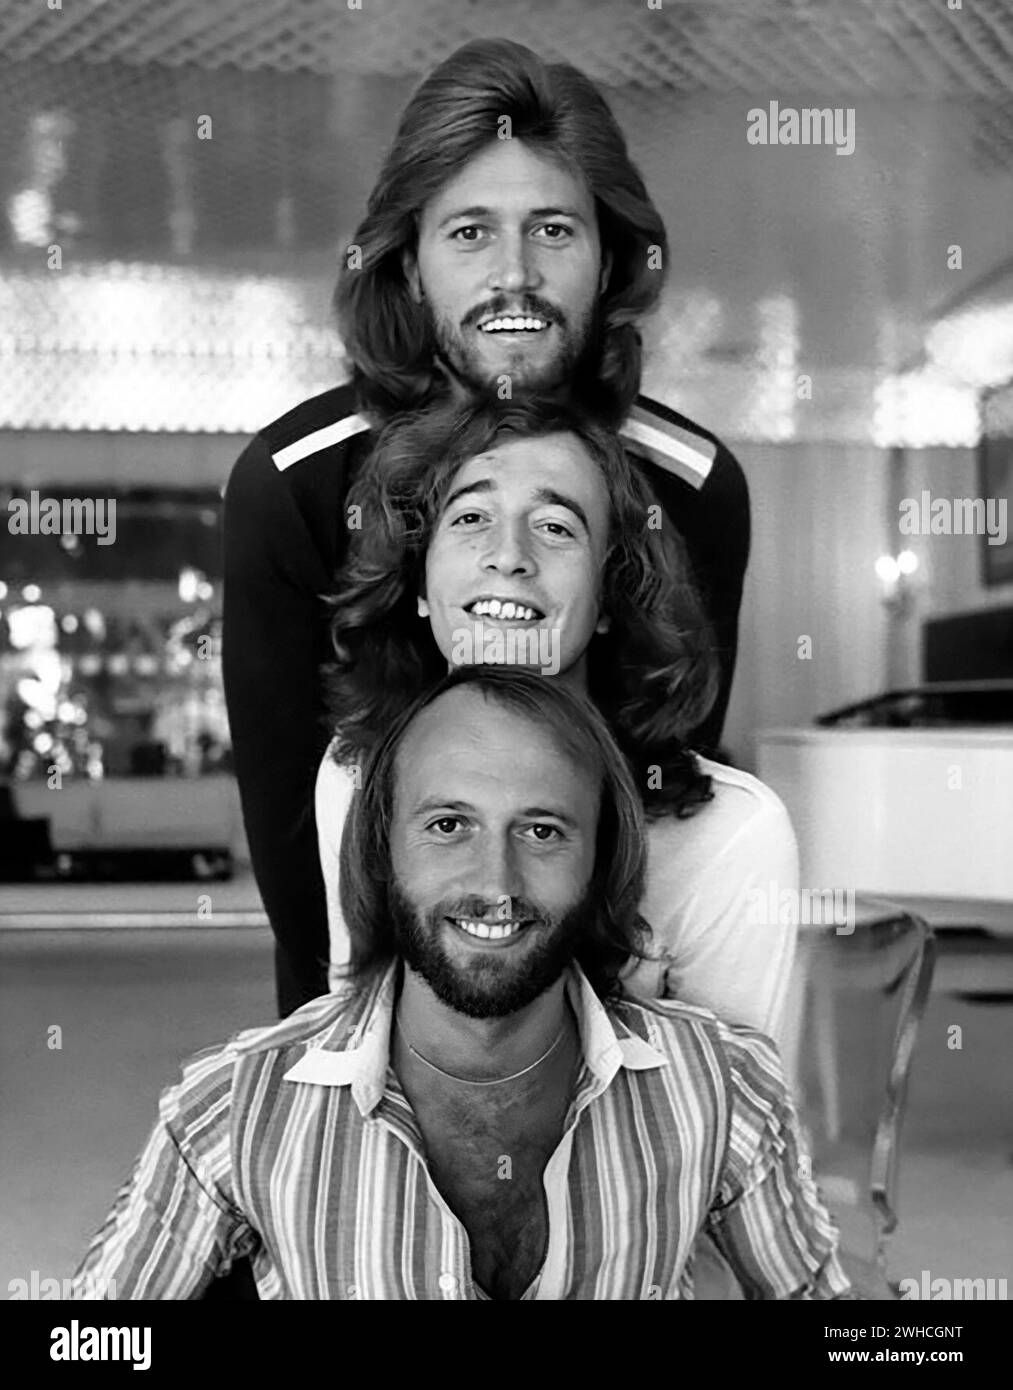 The Bee Gees. Portrait of the British pop group The Bee Gees in 1977. From the top, Barry Gibb (b. 1946), Robin Gibb (1949-2012) , Maurice Gibb (1949-2003) Stock Photo